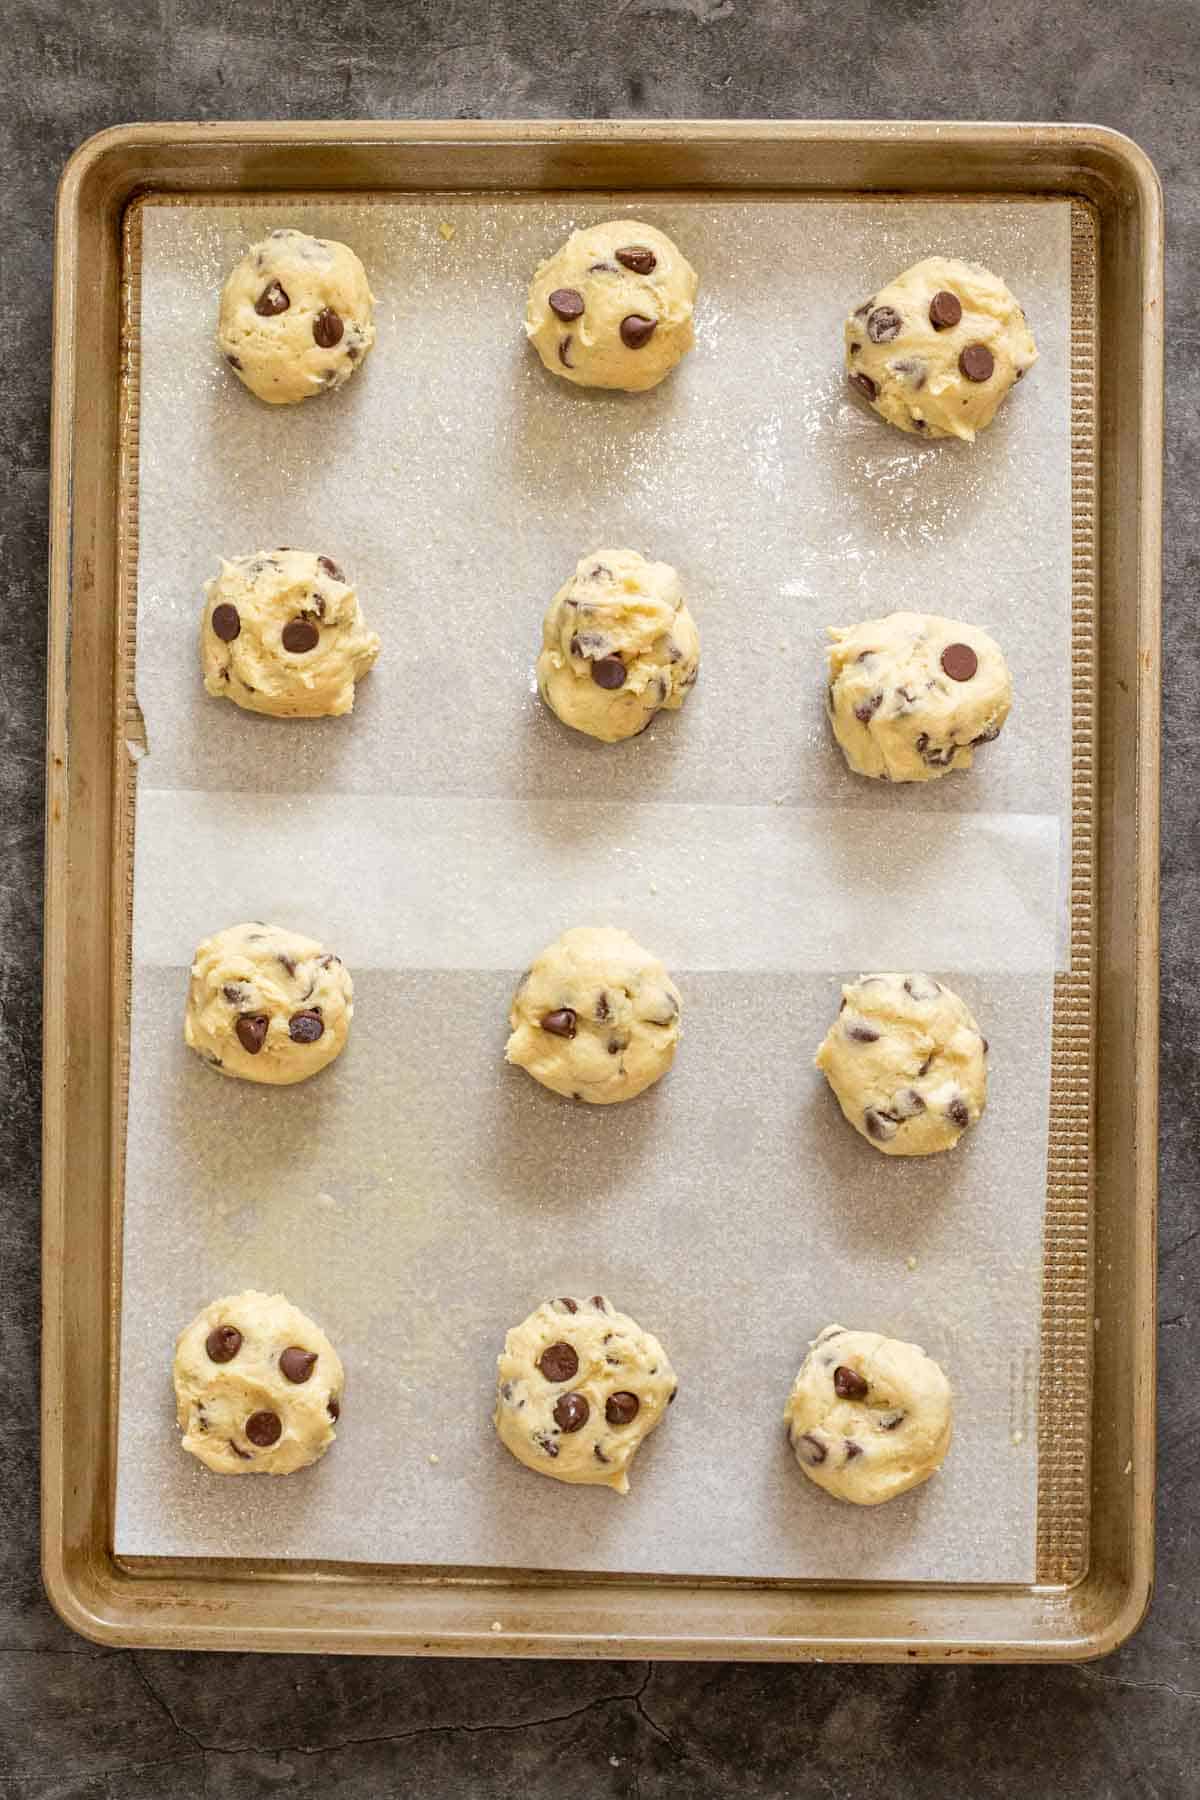 Raw cookies arranged on a baking sheet.